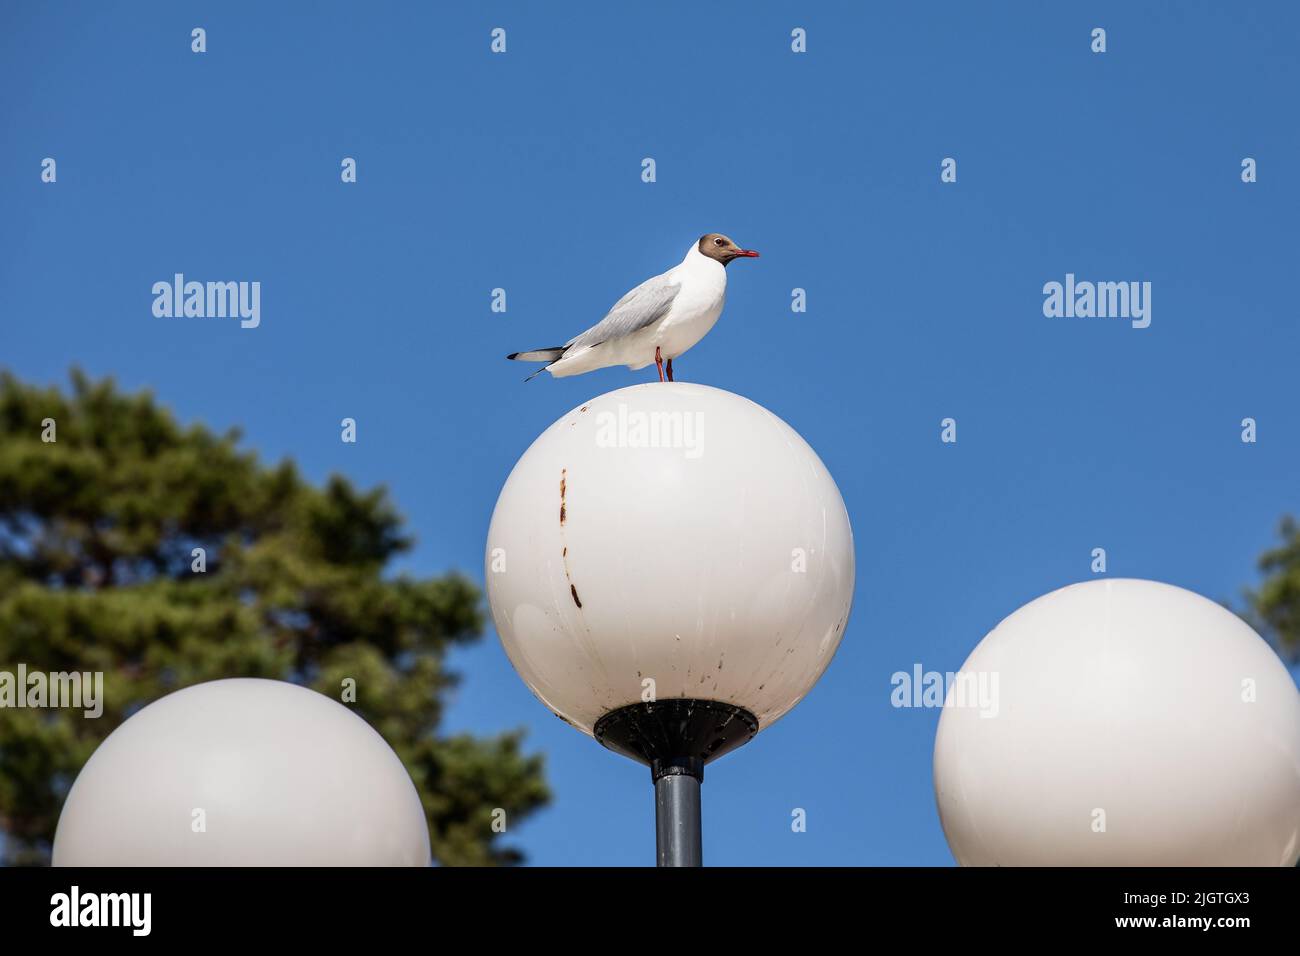 Tern on a round outdoor lamp, birds in the urban environment. Stock Photo